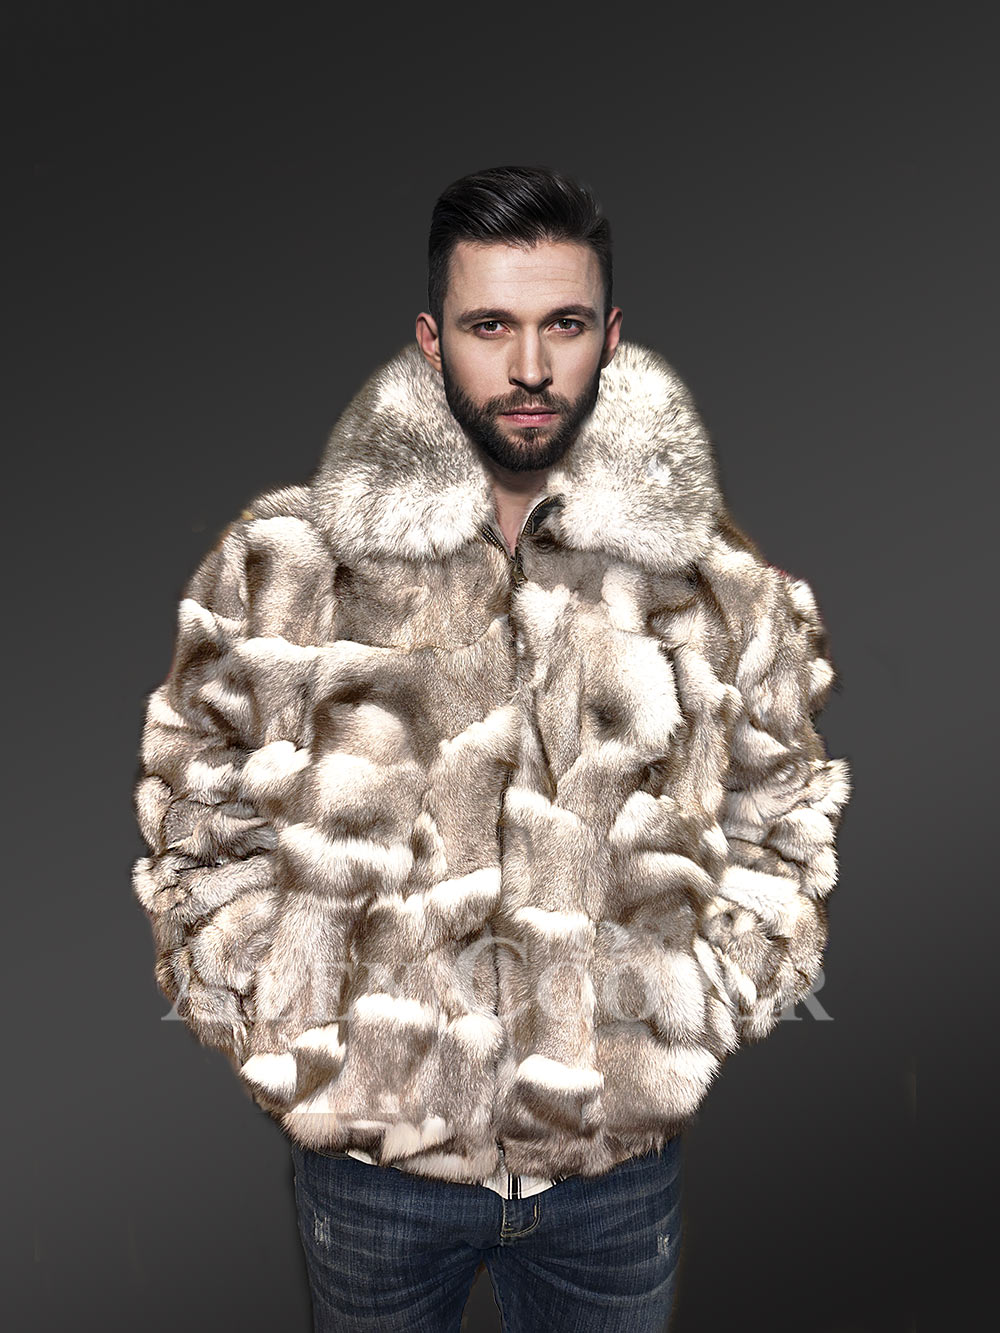 Fox Fur Jacket in Bomber for Men to Look Suave and Classy